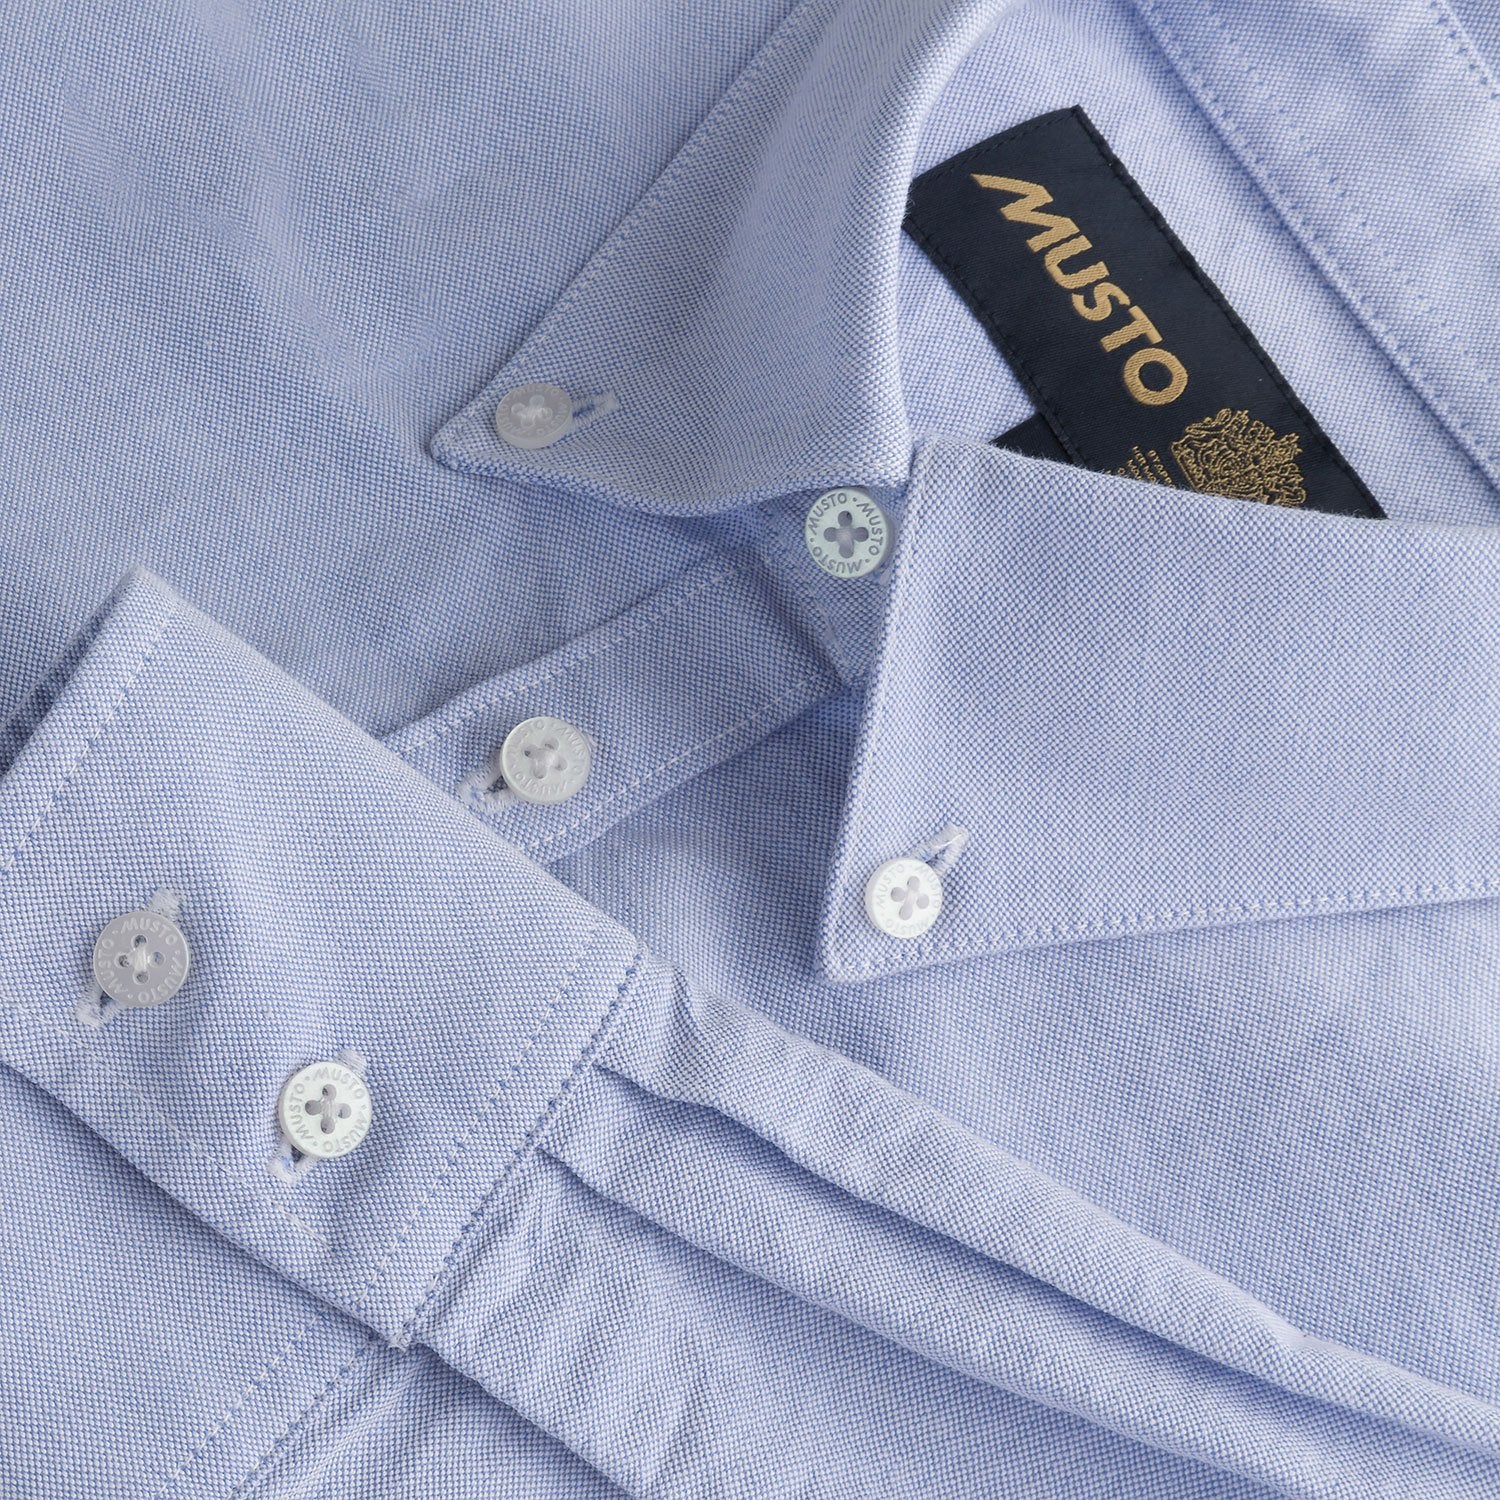 Musto Oxford cotton shirt in Pale Blue